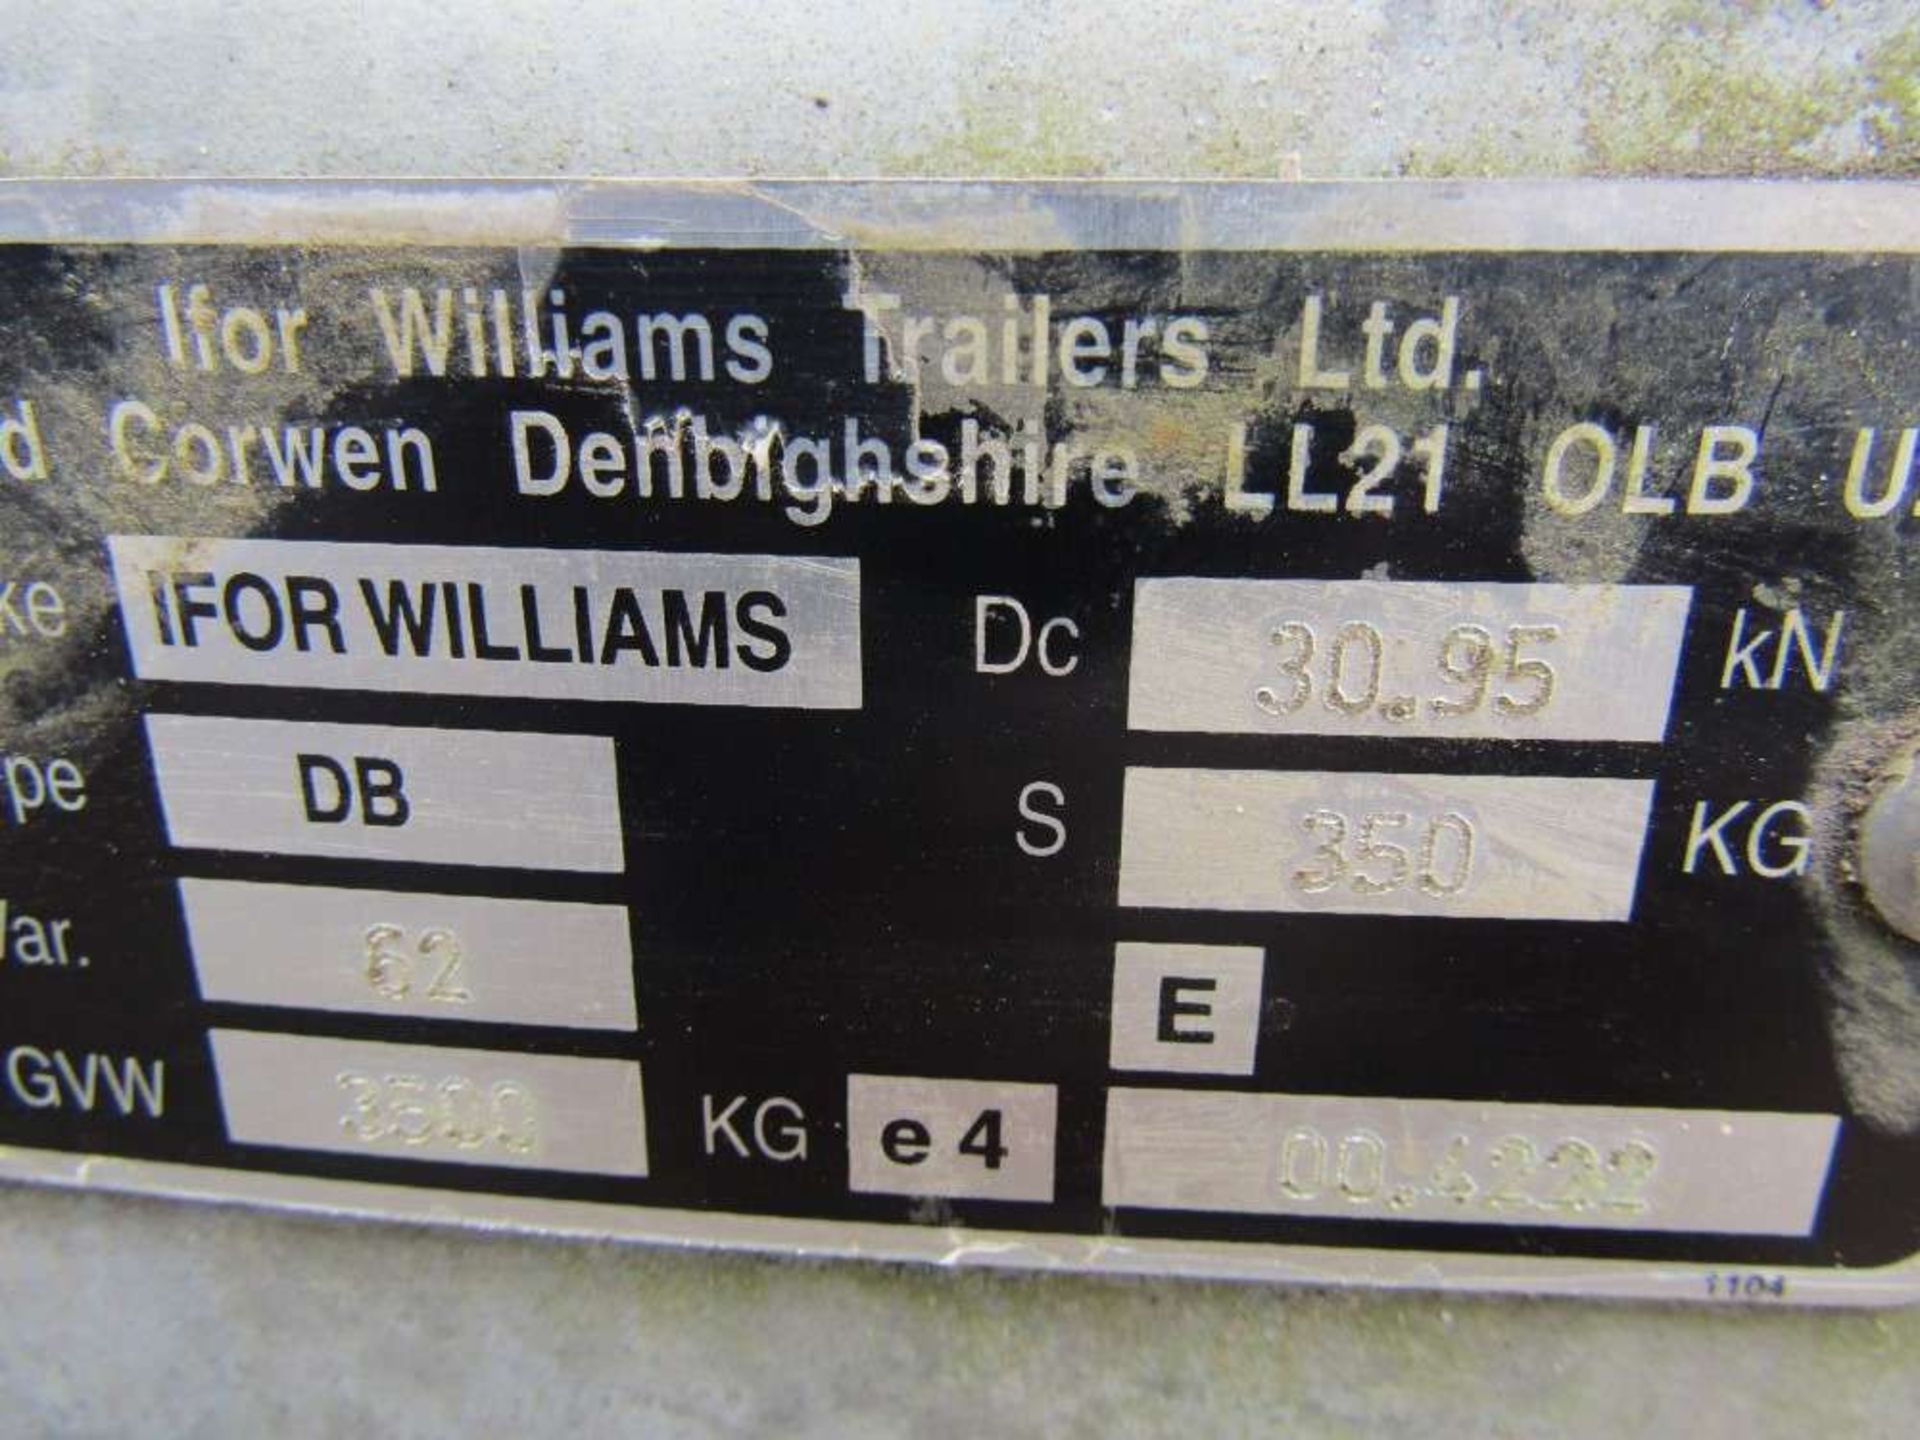 2018 Ifor Williams Tipping Trailer with Mesh Sides - Image 5 of 6